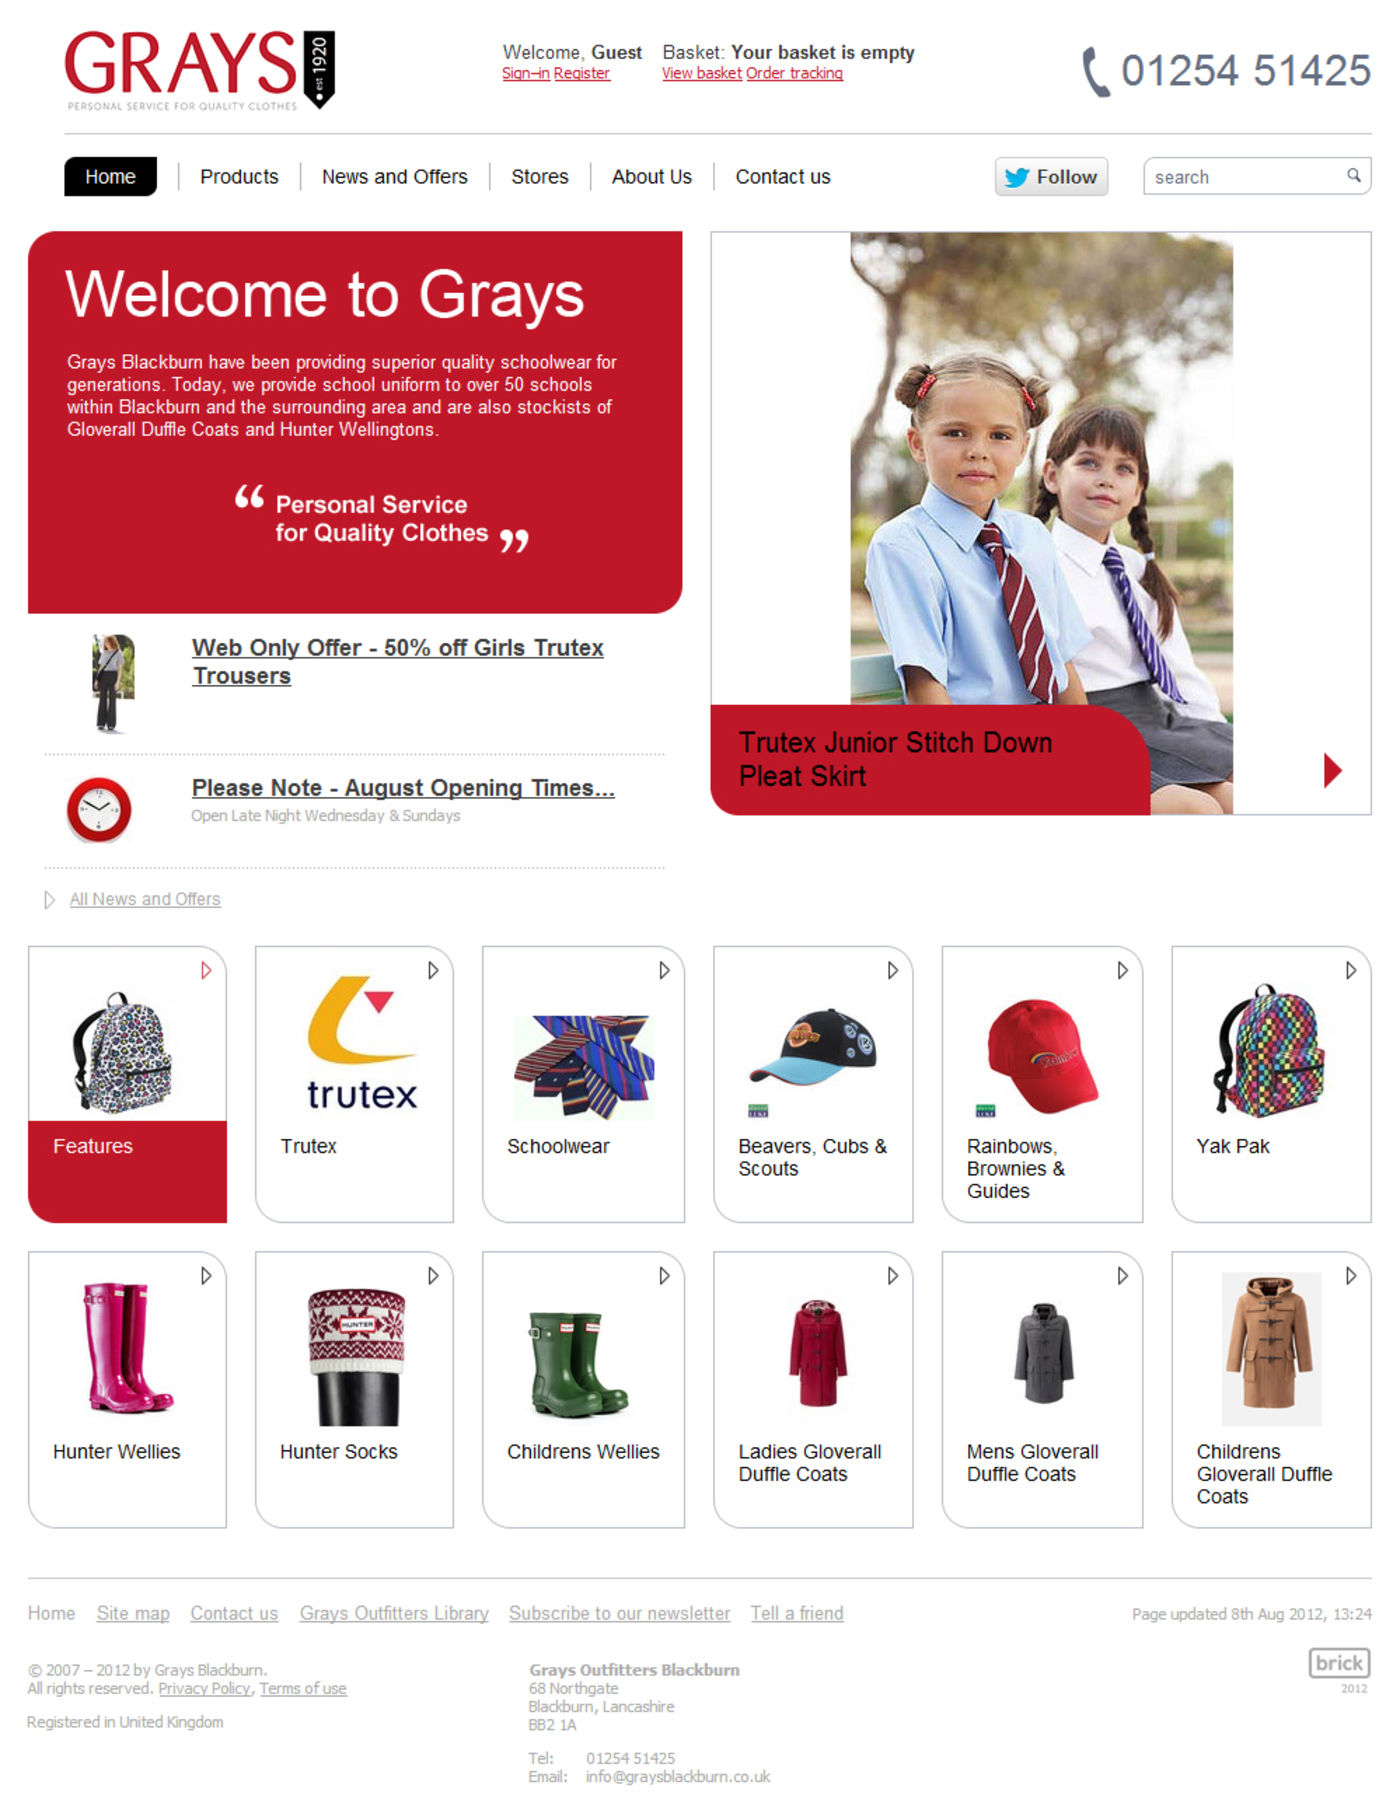 Grays Outfitters Blackburn Home Page 